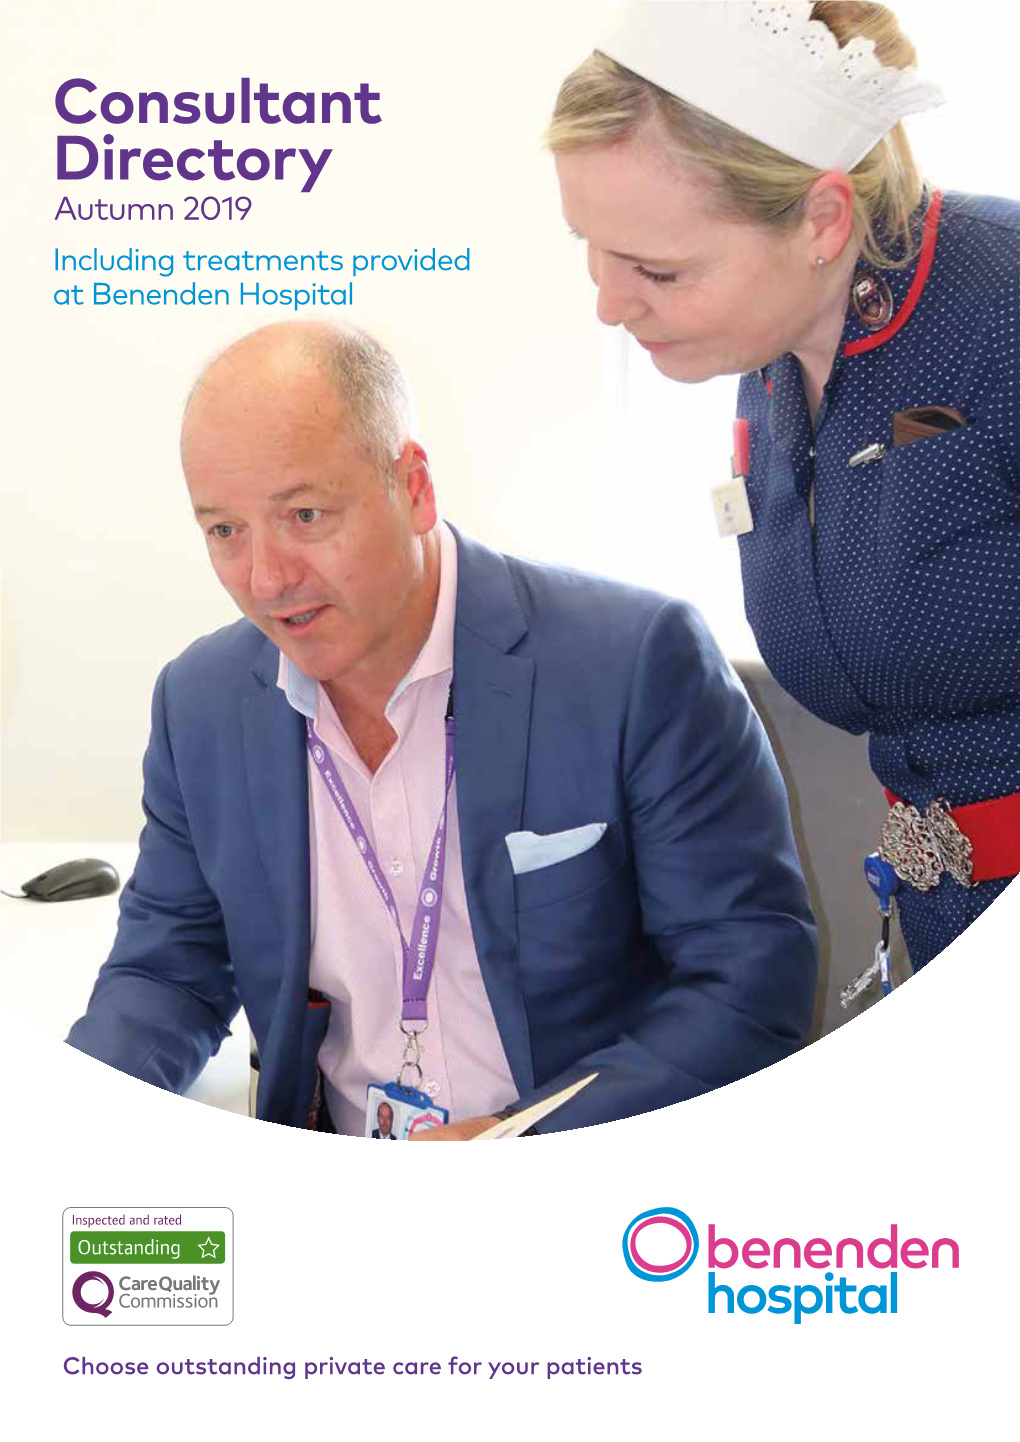 Consultant Directory Autumn 2019 Including Treatments Provided at Benenden Hospital